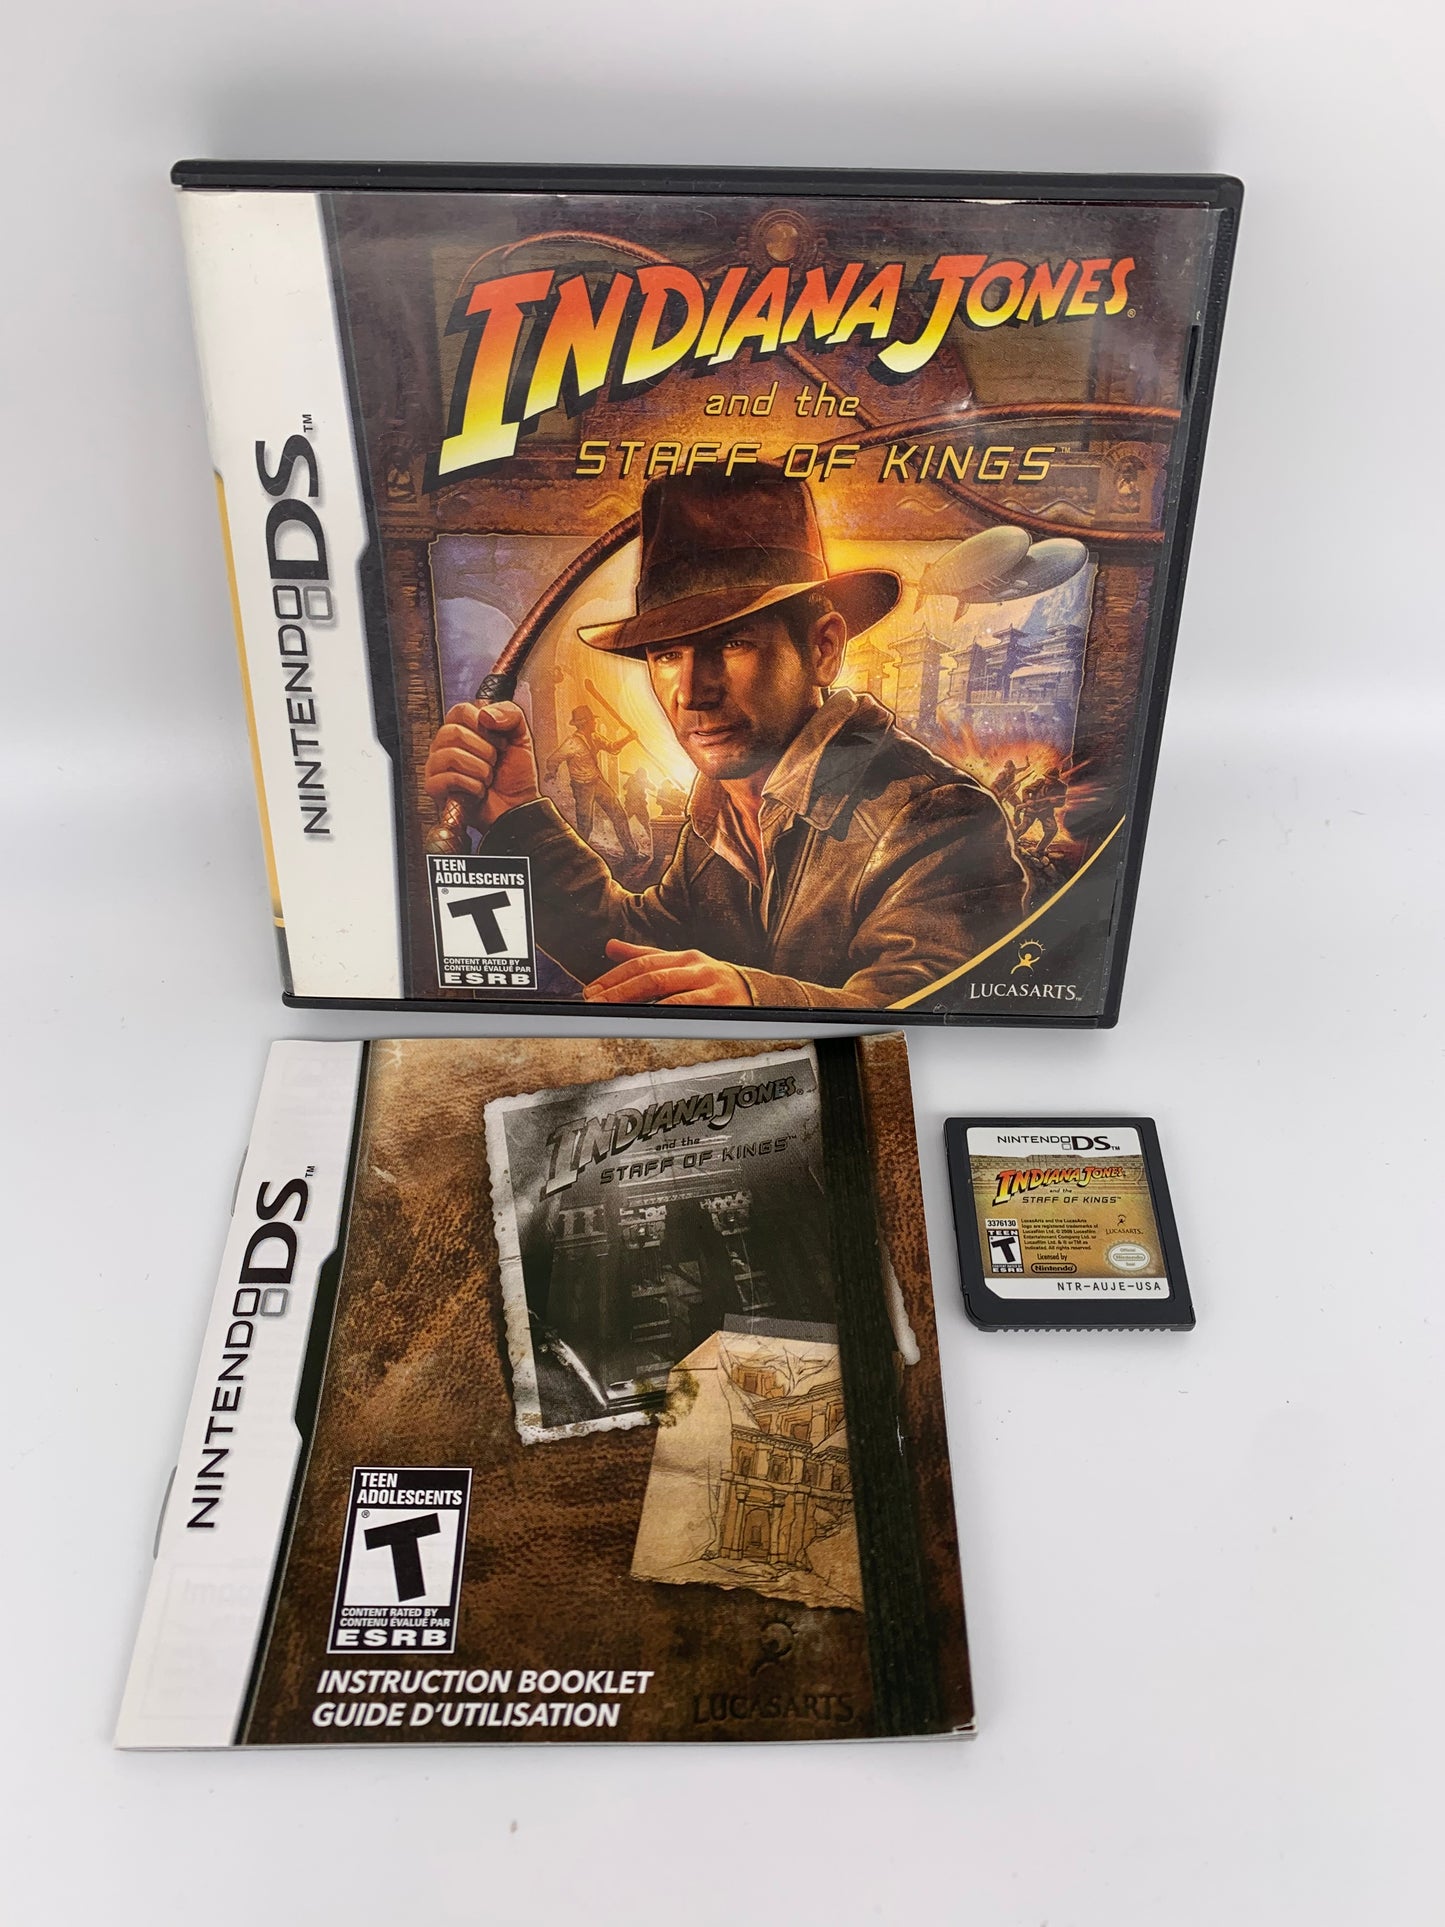 PiXEL-RETRO.COM : NINTENDO DS (DS) COMPLETE CIB BOX MANUAL GAME NTSC INDIANA JONES AND THE STAFF OF KINGS